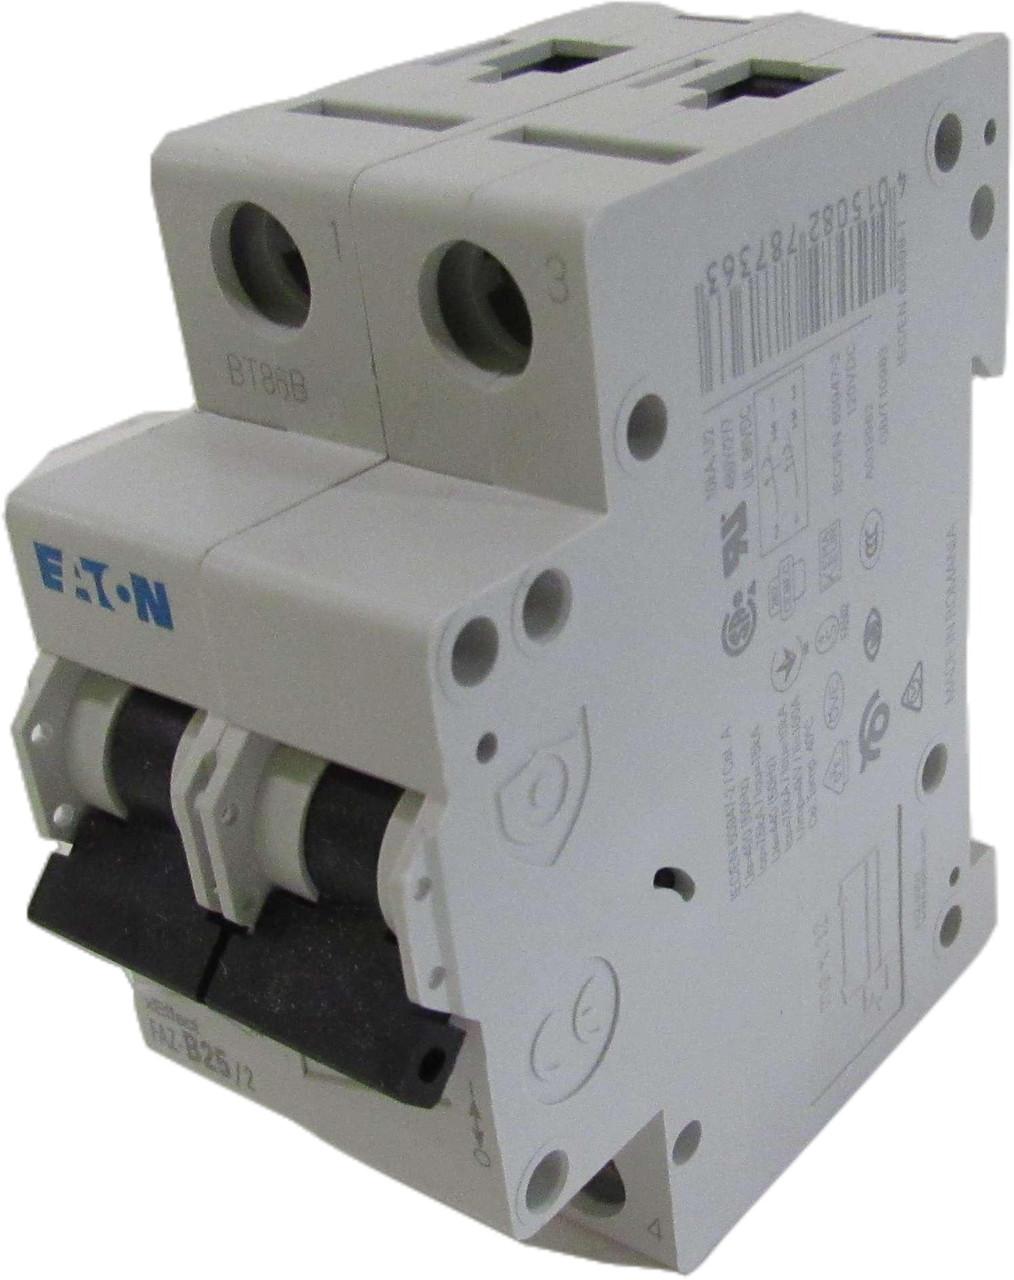 Eaton FAZ-B25/2 Eaton FAZ supplementary protector,UL 1077 Industrial miniature circuit breaker - supplementary protector,Low levels of inrush current are expected,25 A,15 kAIC,Two-pole,3-5X /n,50-60 Hz,Standard terminals,B Curve